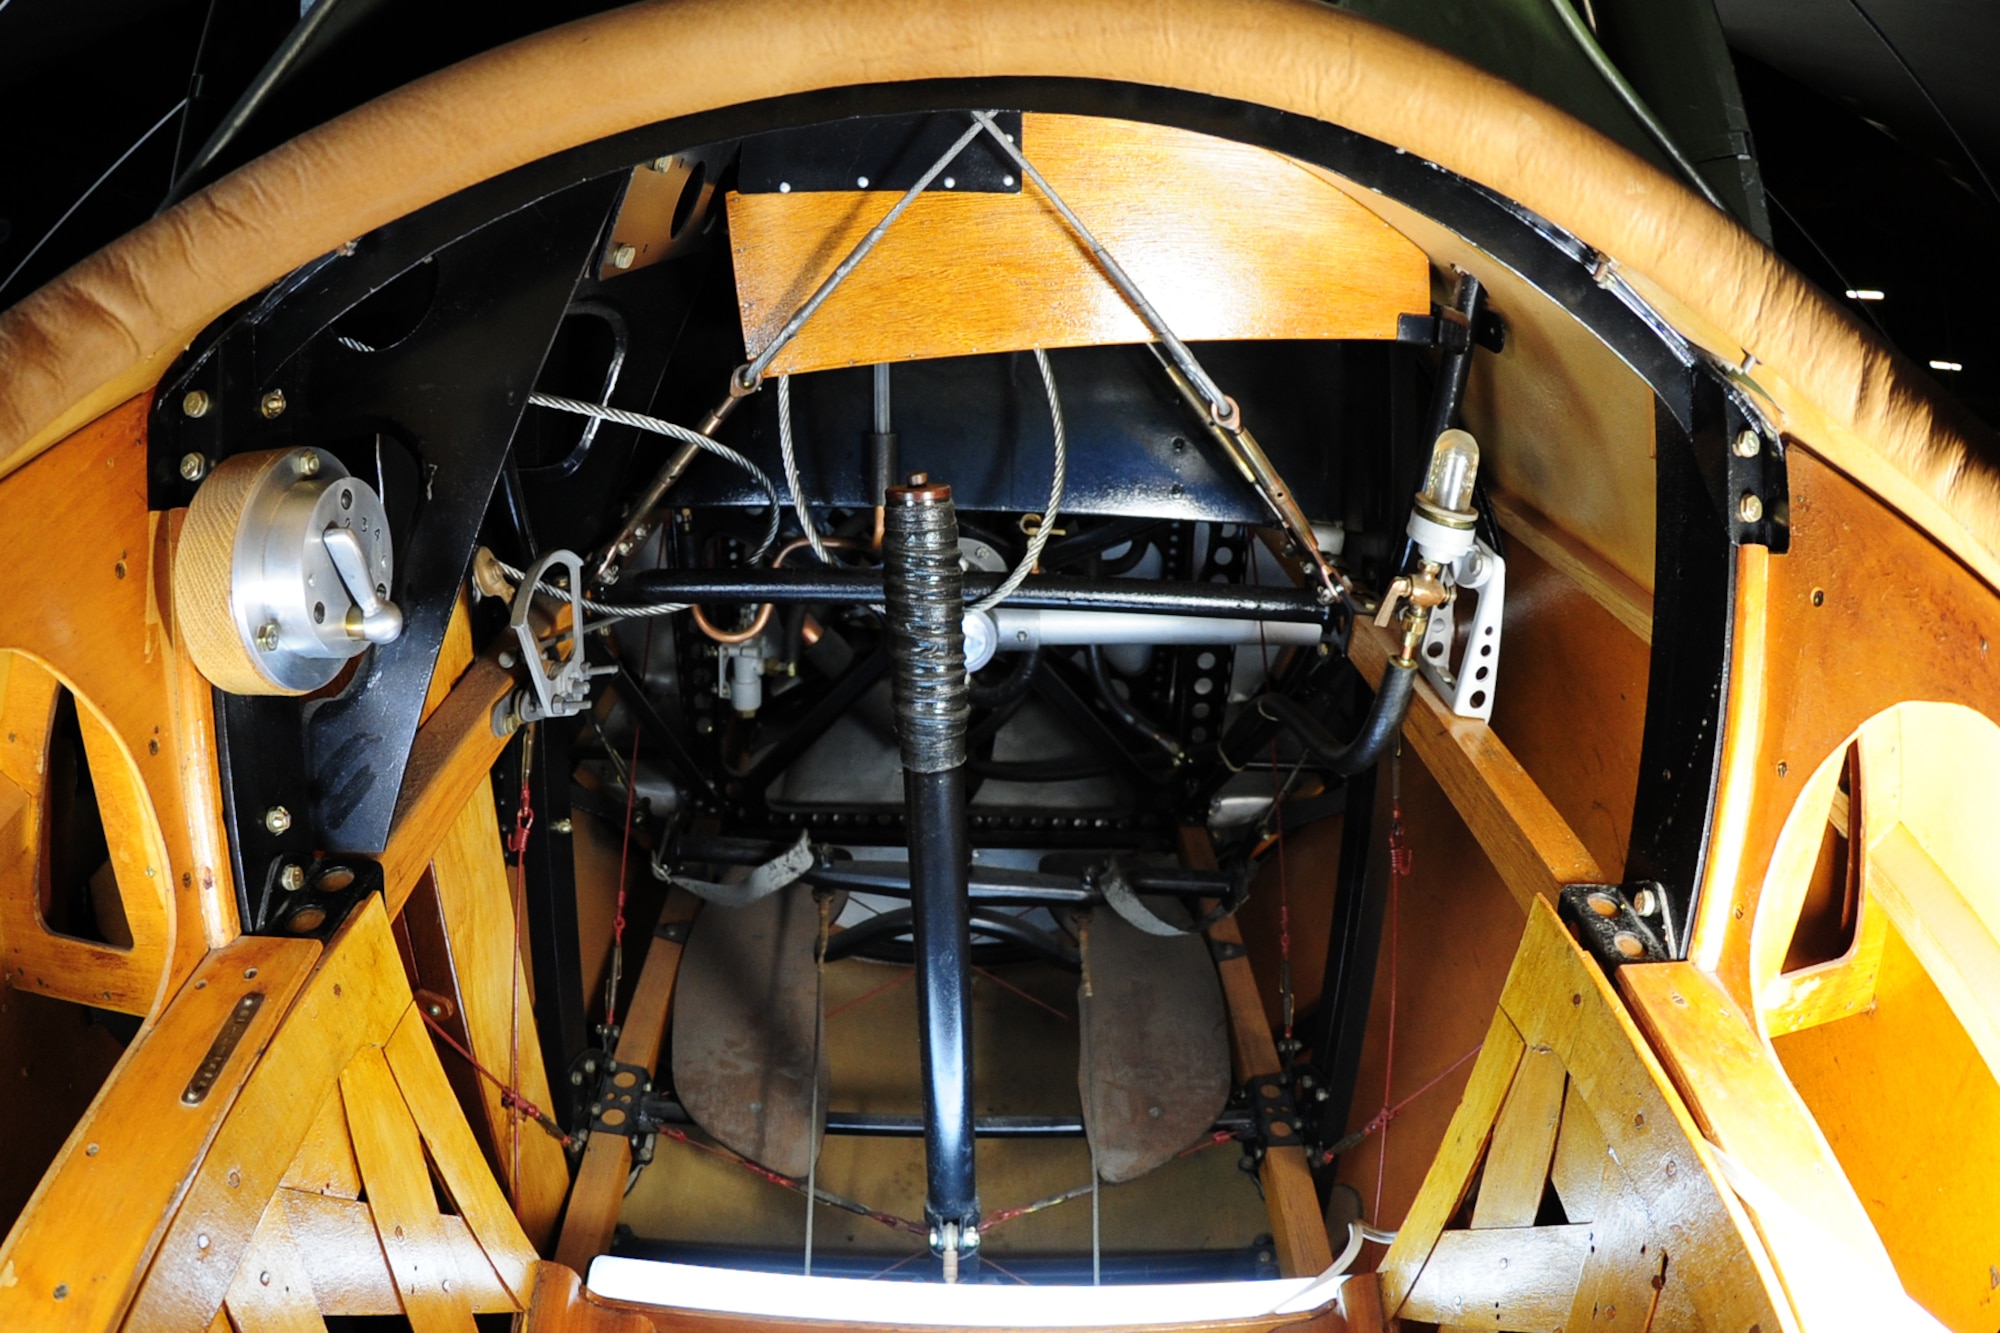 DAYTON, Ohio -- Nieuport N.28C-1 cockpit at the National Museum of the United States Air Force. (U.S. Air Force photo)